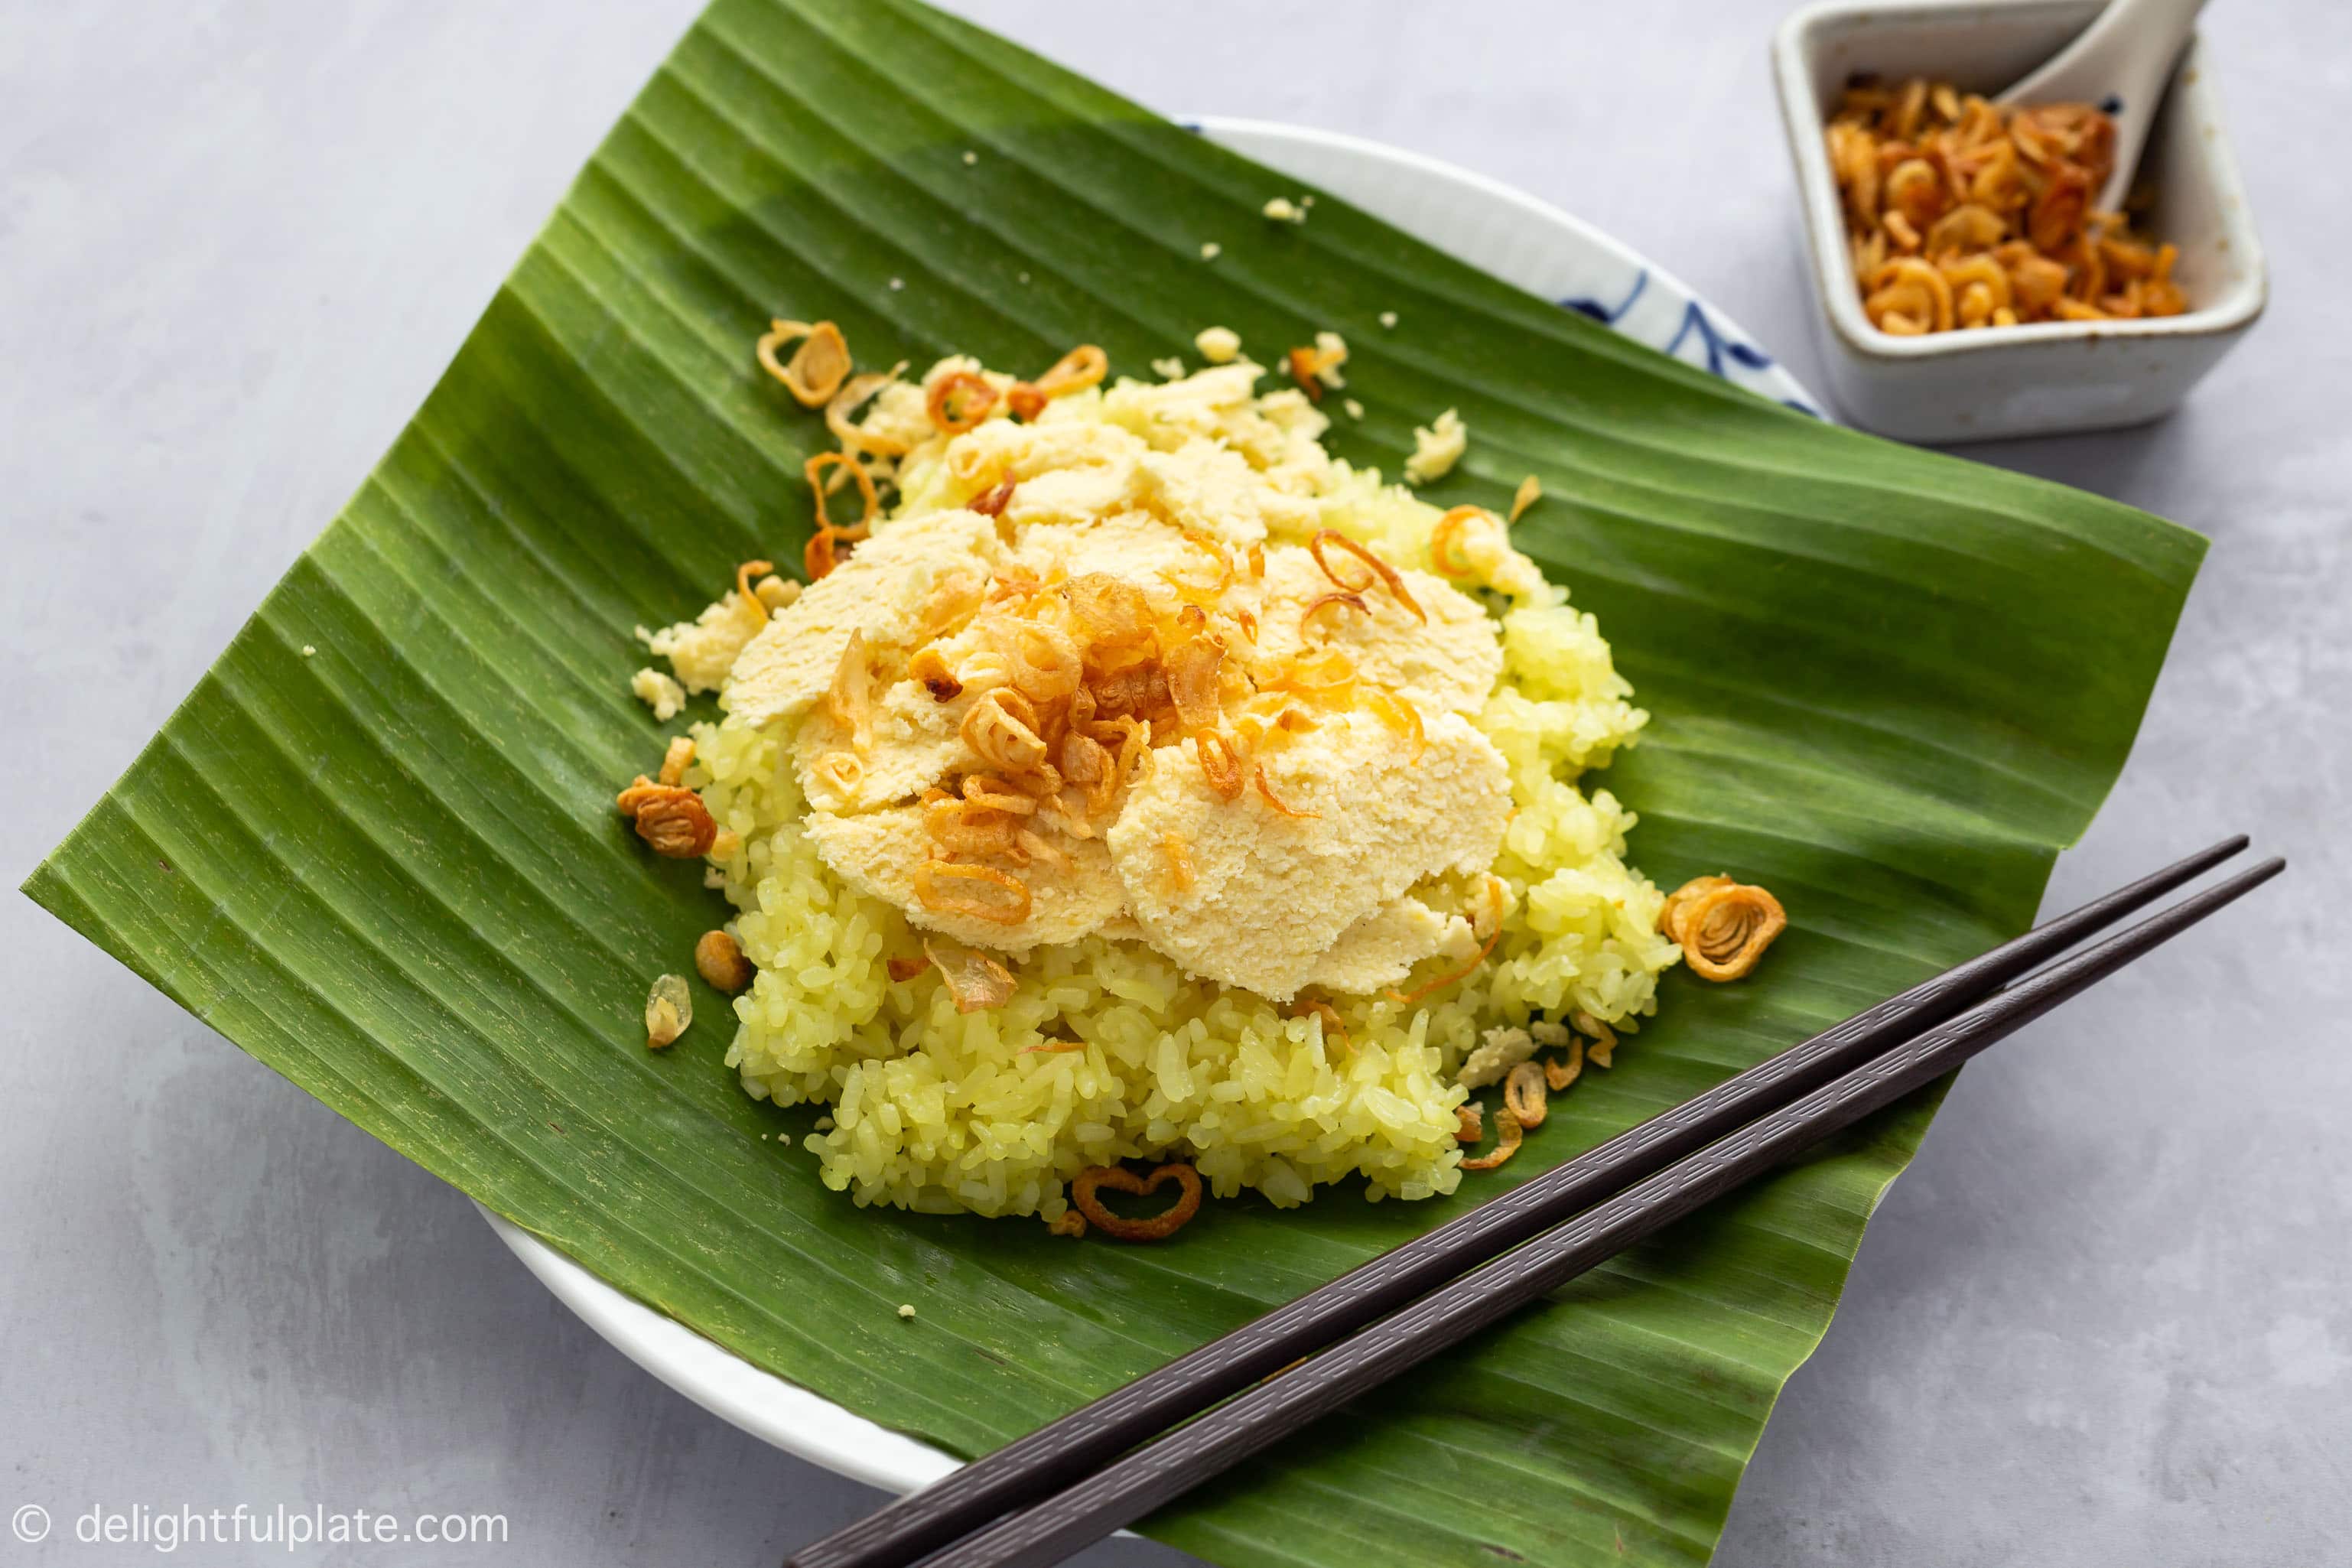 A plate of Xoi Xeo Hanoi, with Vietnamese steamed sticky rice, slices of mung bean and fried shallots.